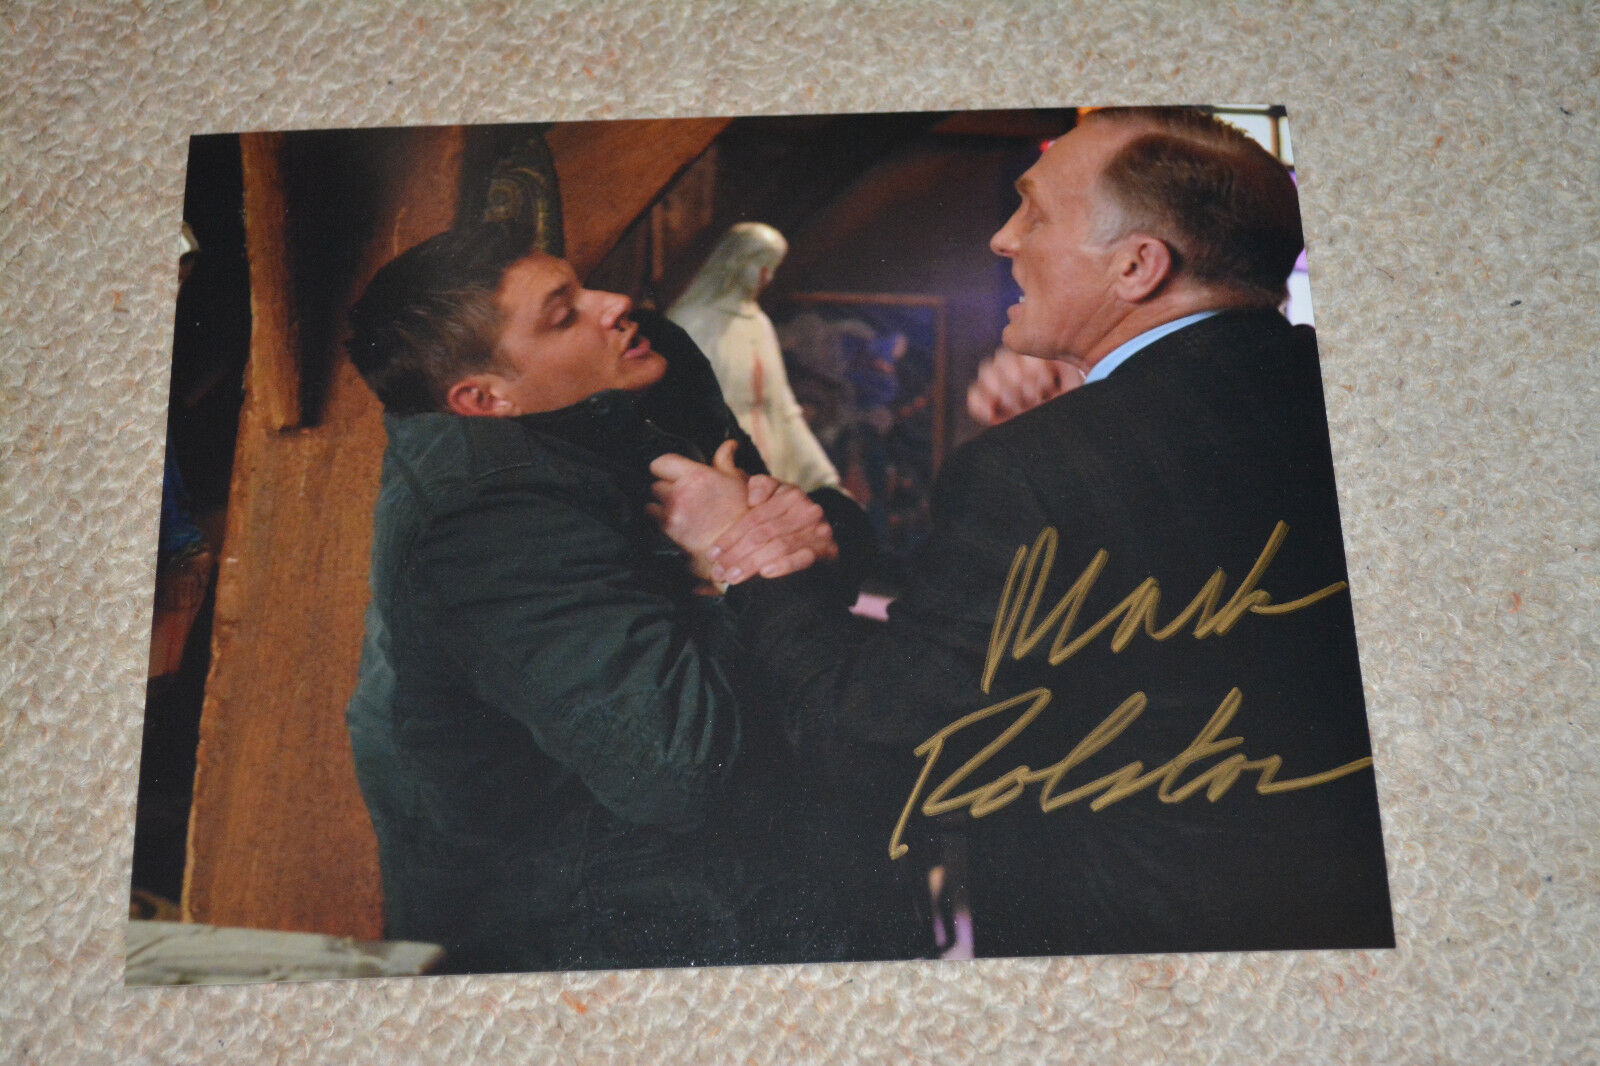 MARK ROLSTON signed autograph In Person 8x10 20x25cm SUPERNATURAL